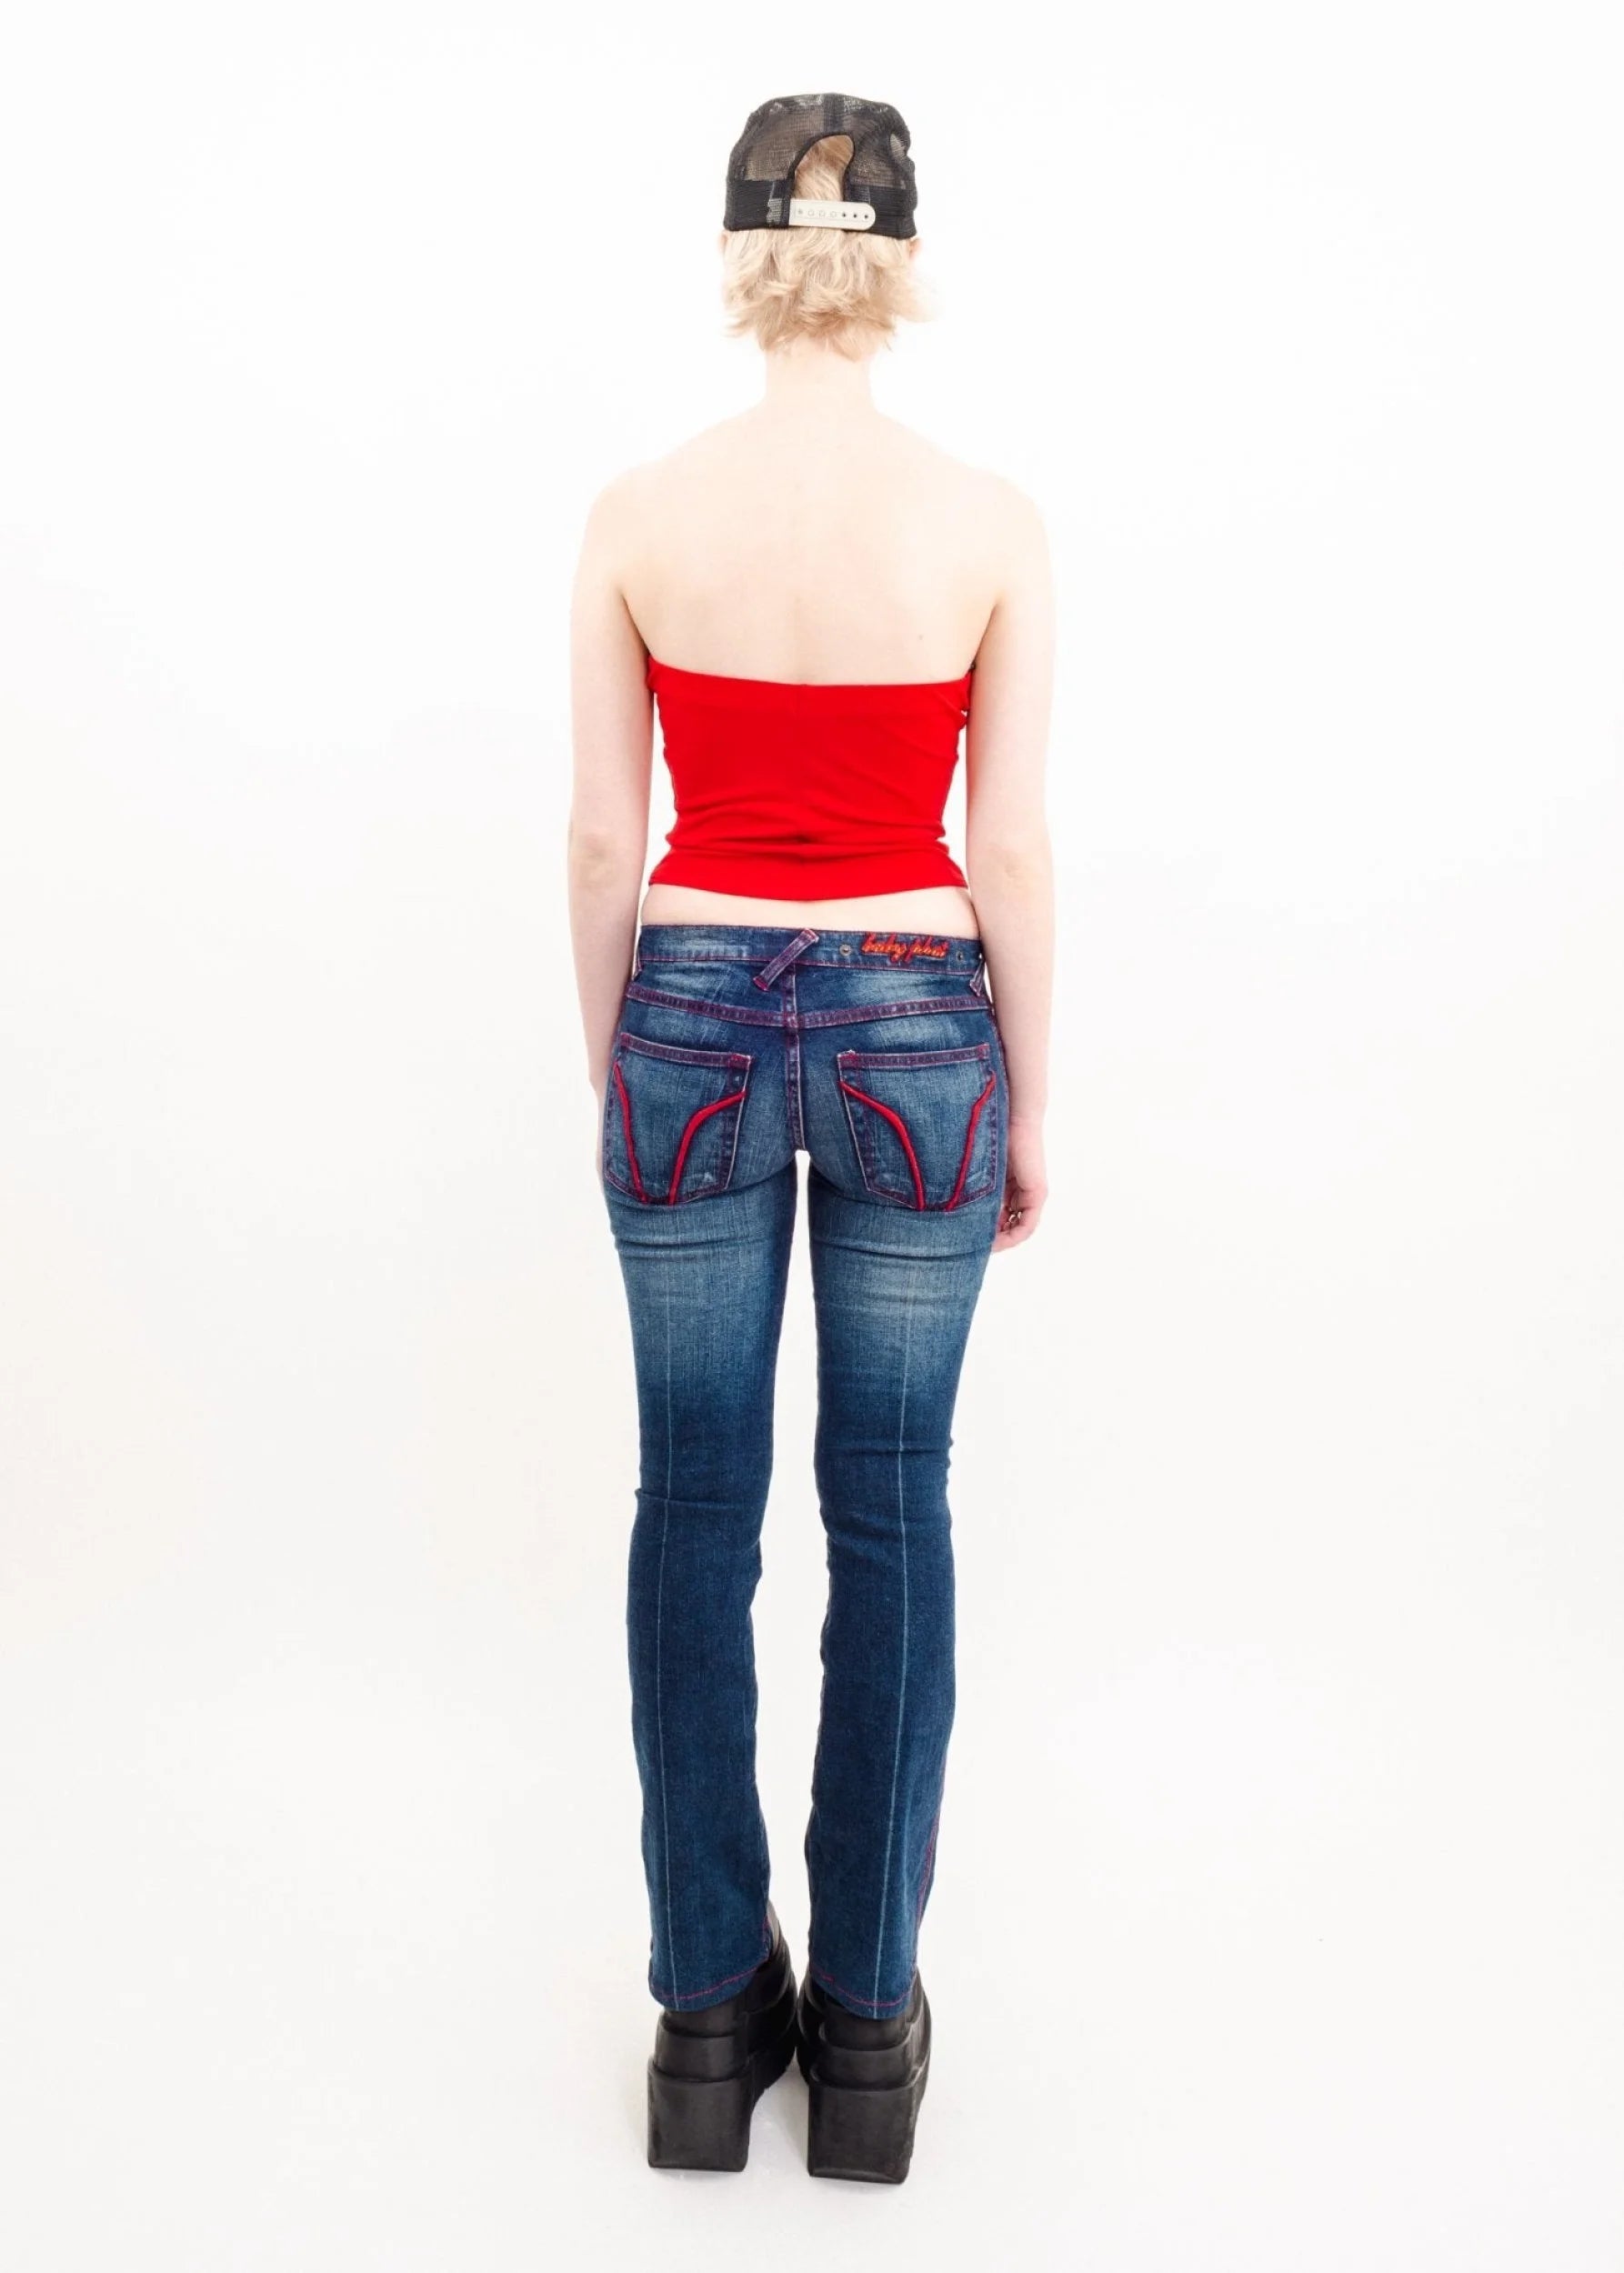 Baby Phat Straight leg jeans with red contrast stitching